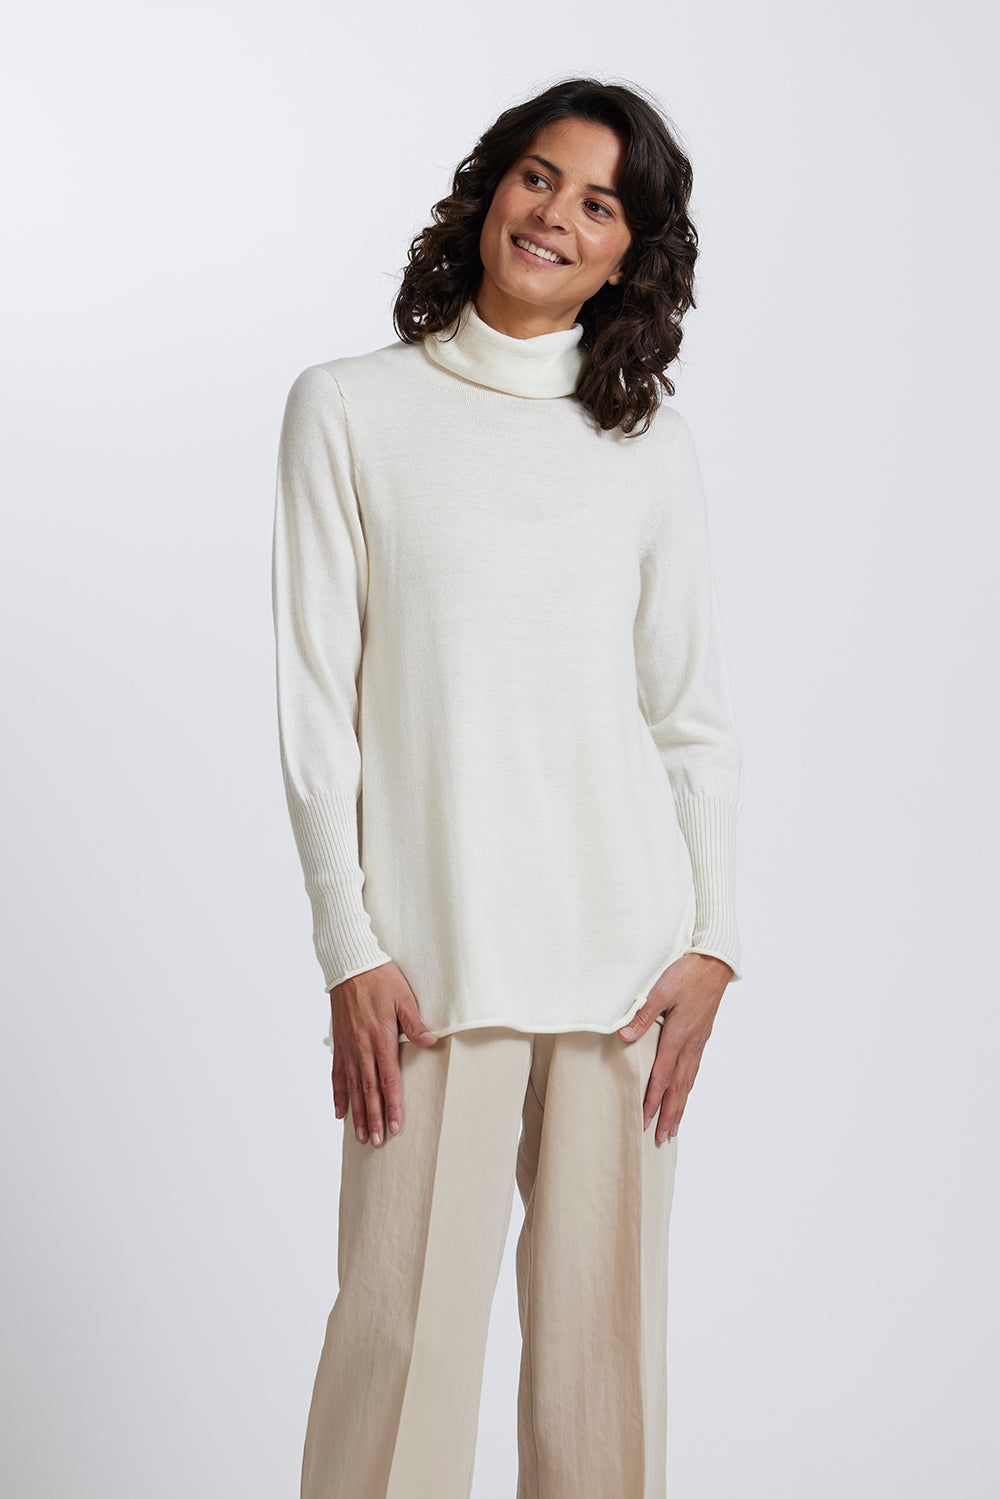 A-Line Funnel Neck Sweater in Natural by Royal Merino